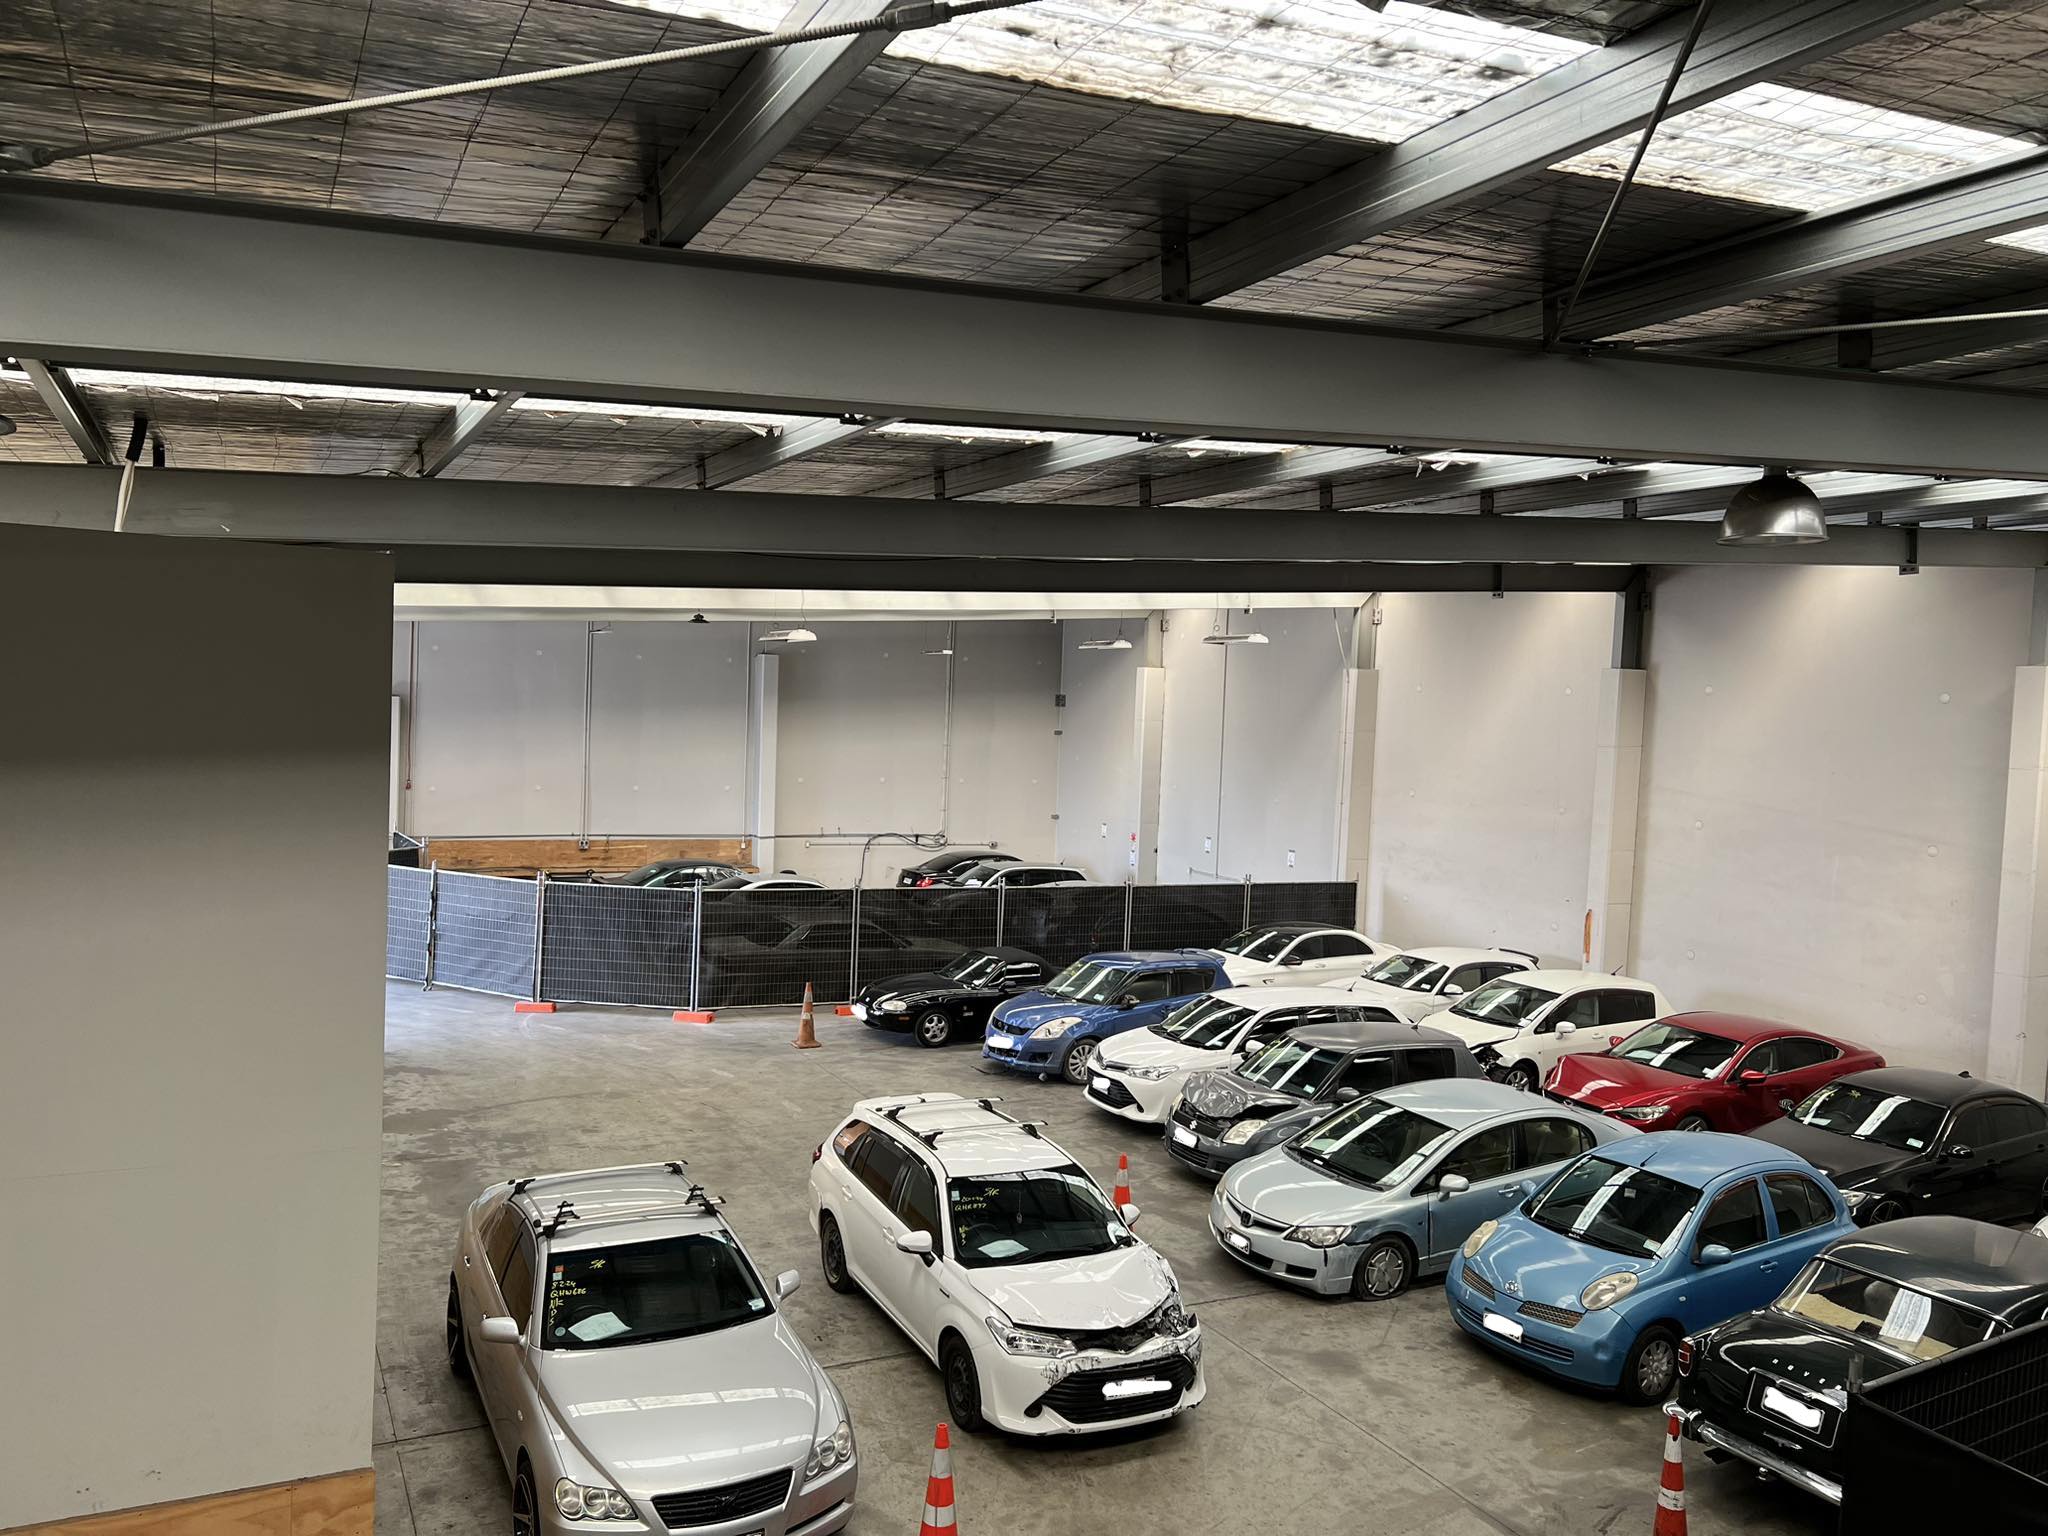 Cars stored in warehouse